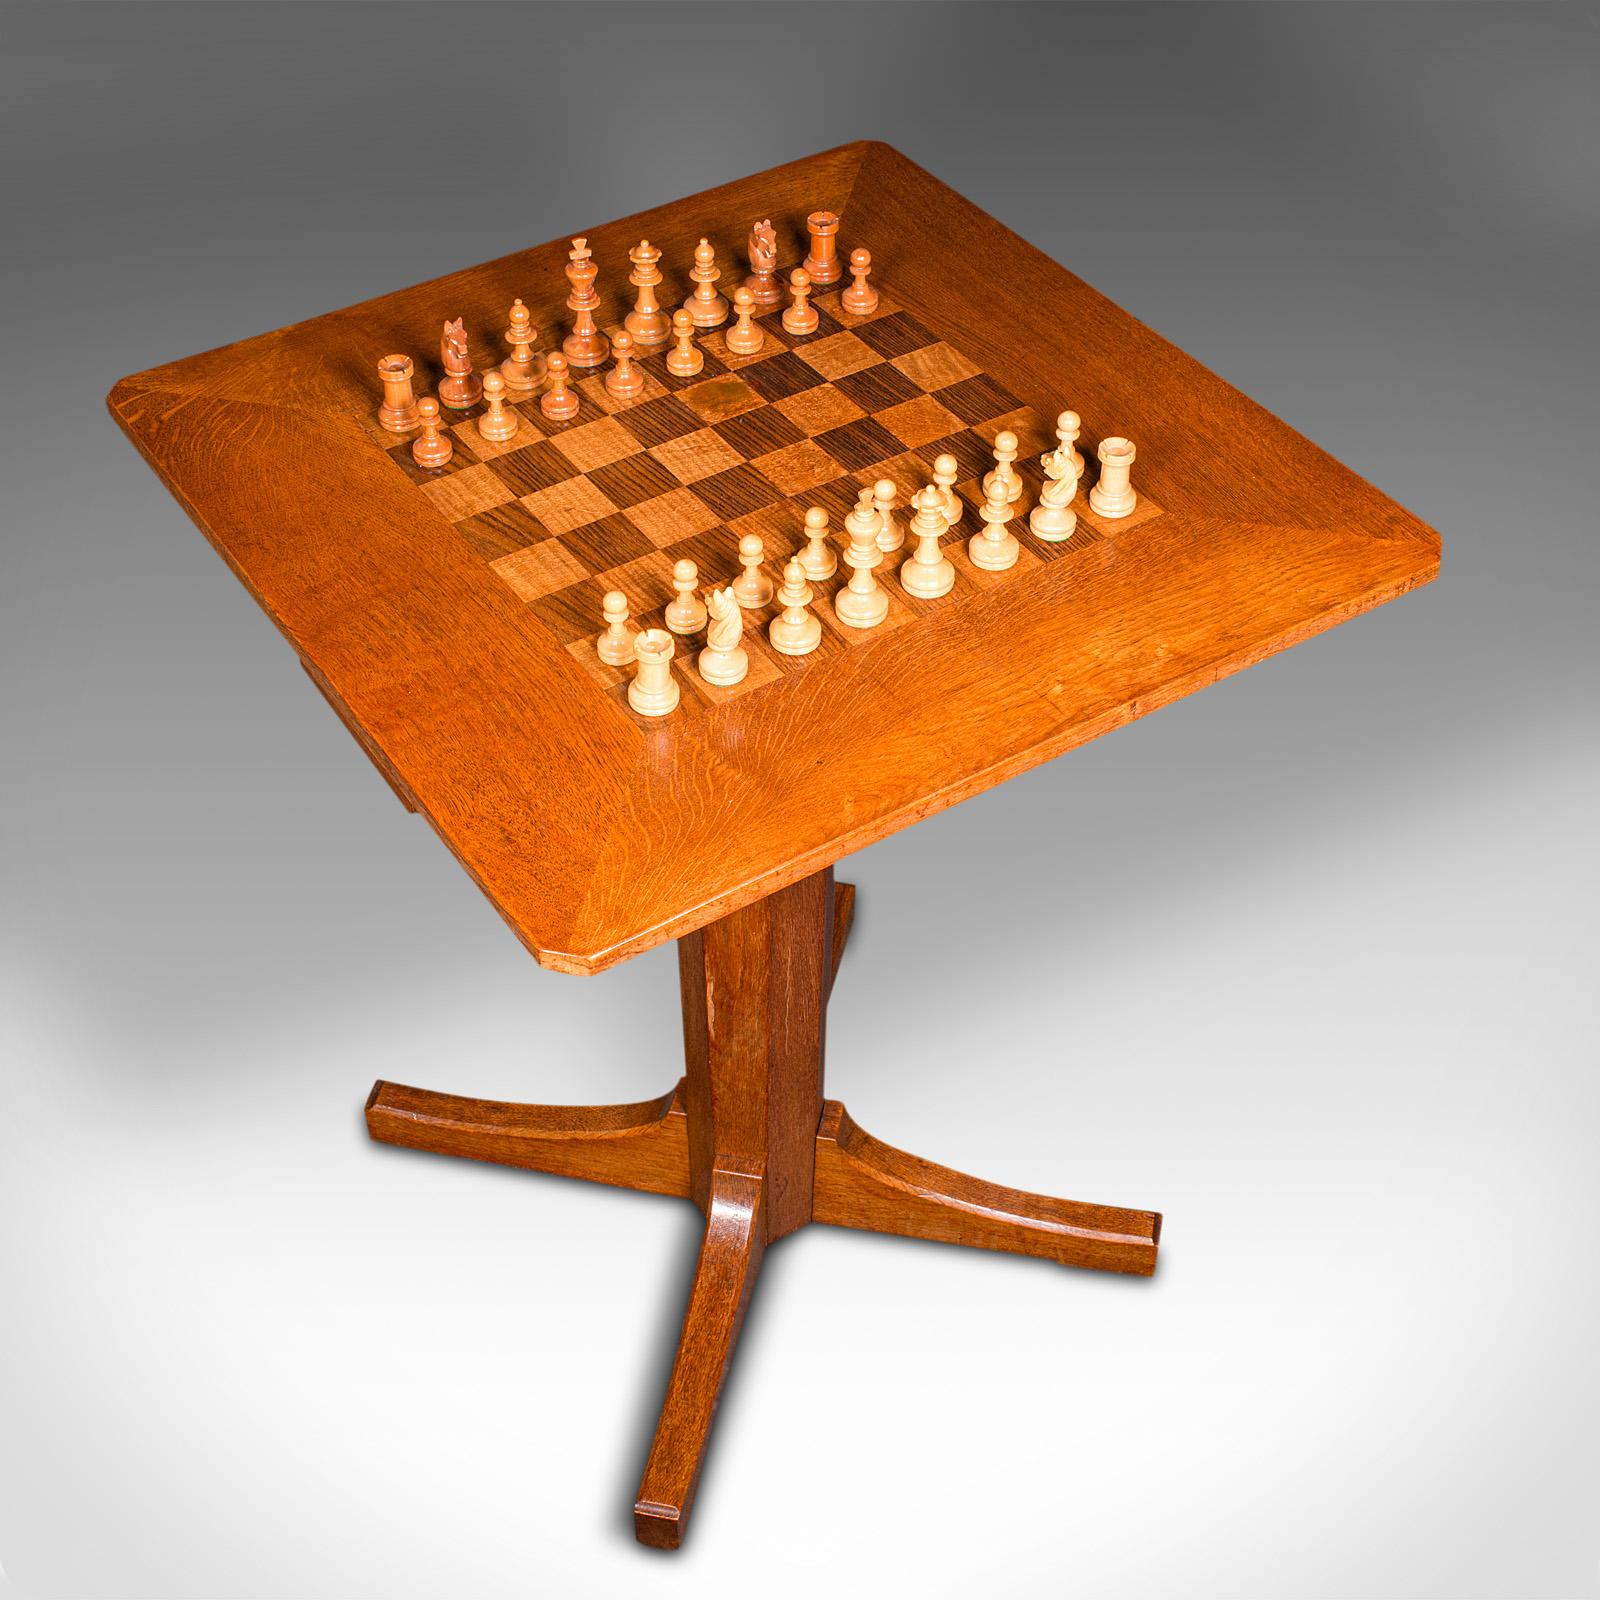 Antique Chess Table, English Oak, Games Table, Cotswold School, Mid 20th Century For Sale 1